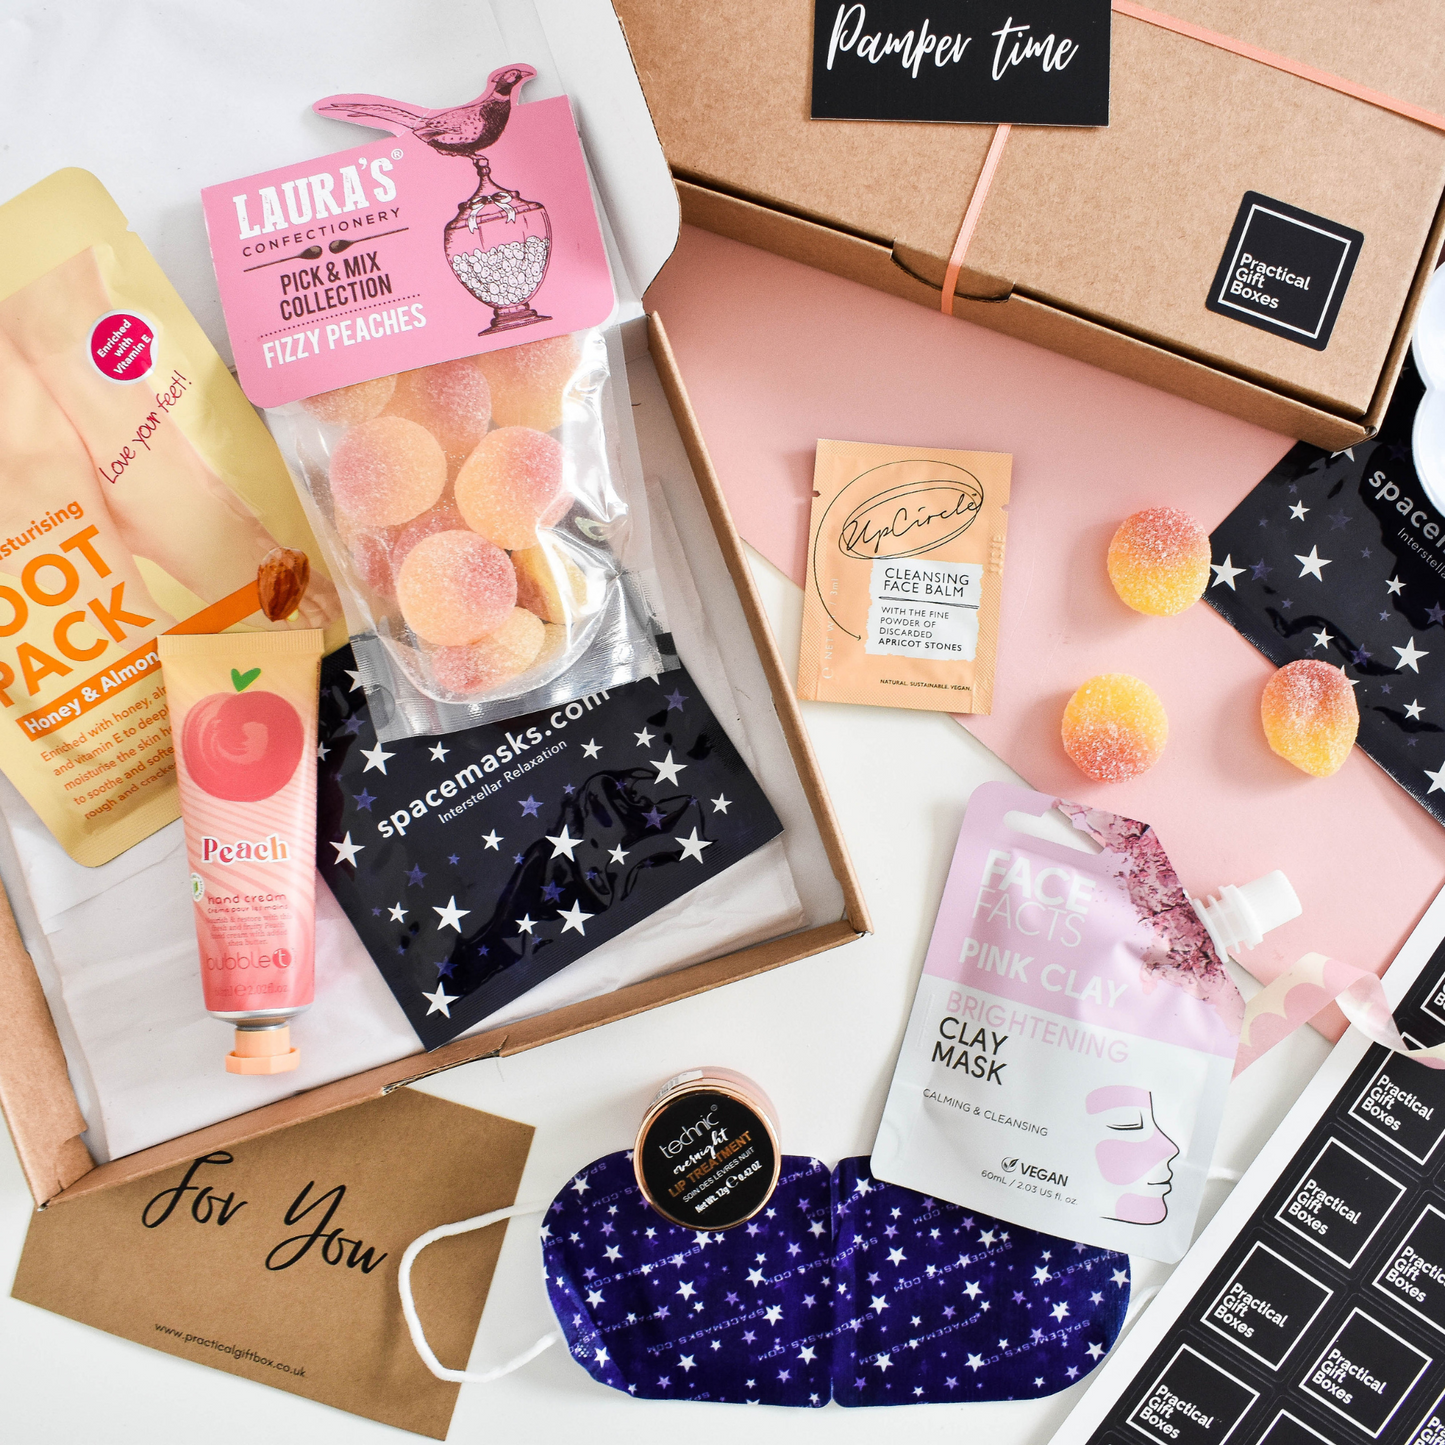 Pamper Gift Box - A Home Spa Kit for Well Being and Relaxation